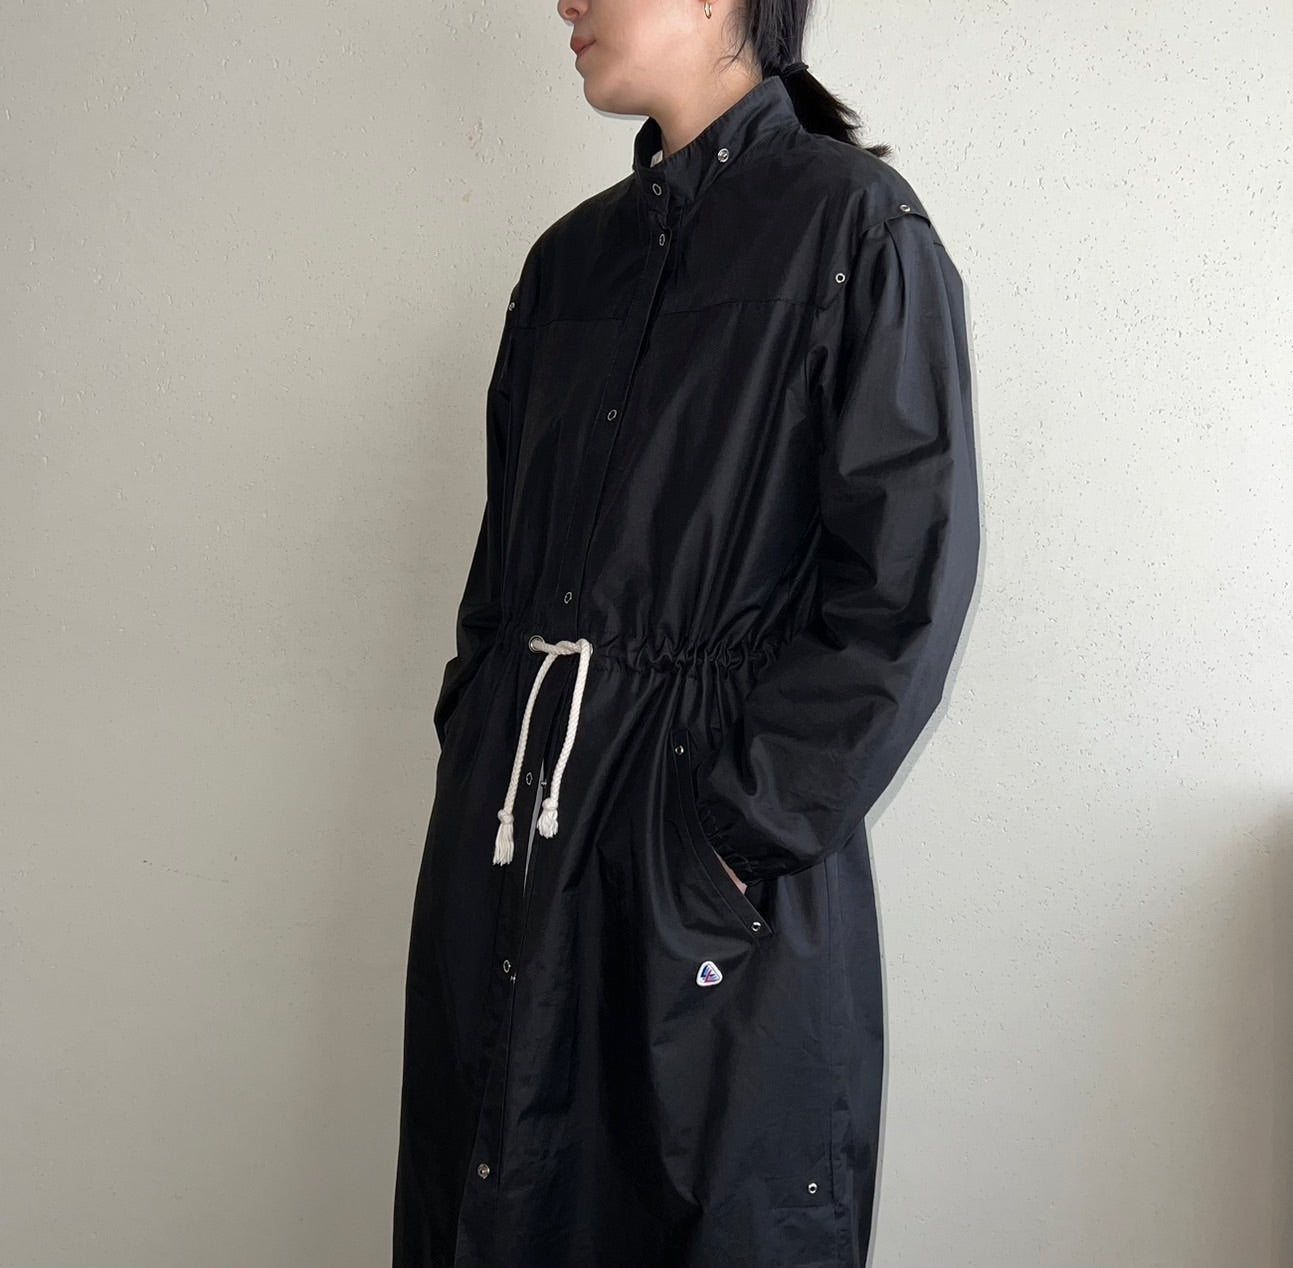 90s Light Coat Made in Finland